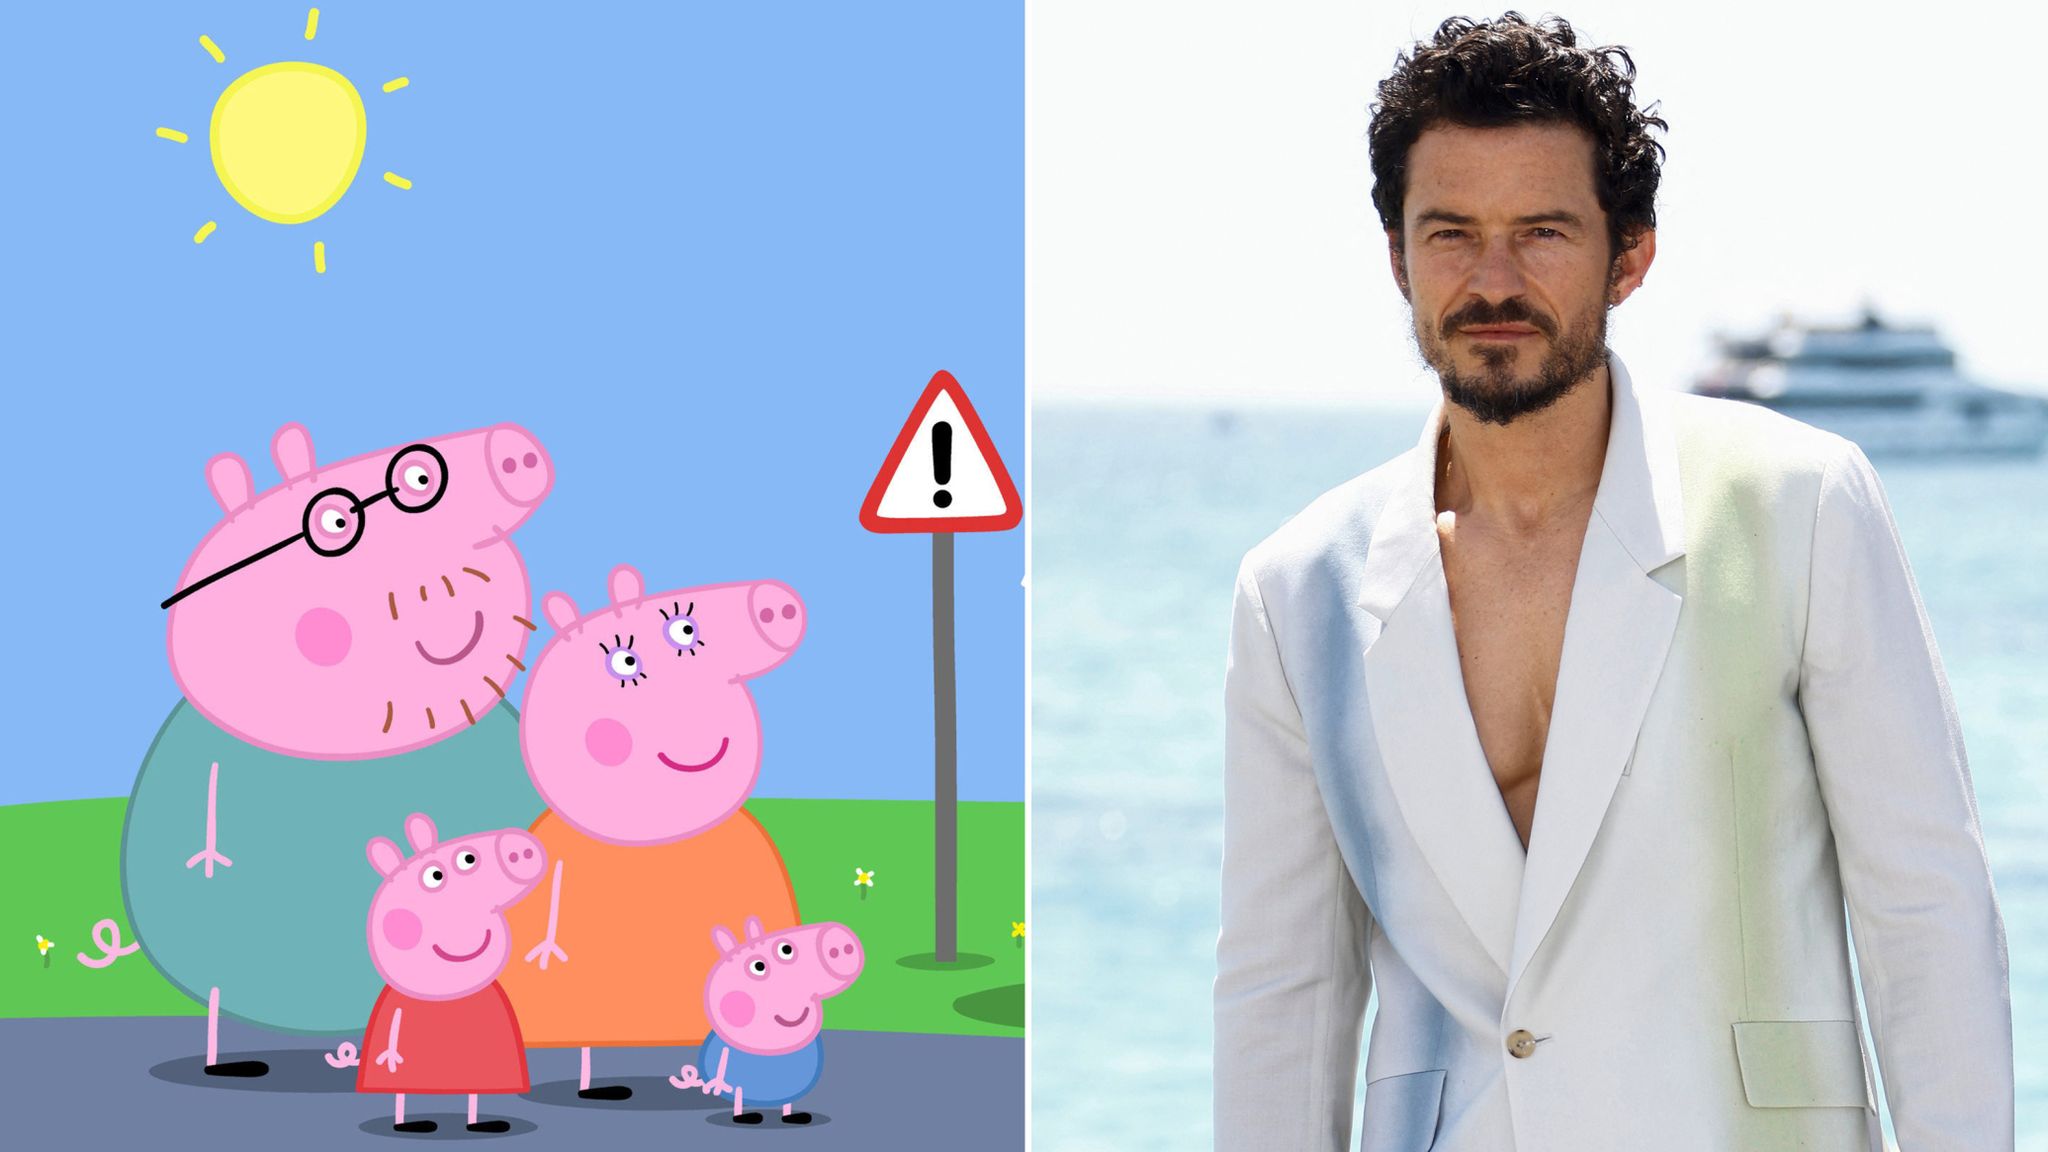 Orlando Bloom joins Katy Perry in special Peppa Pig guest, peppa